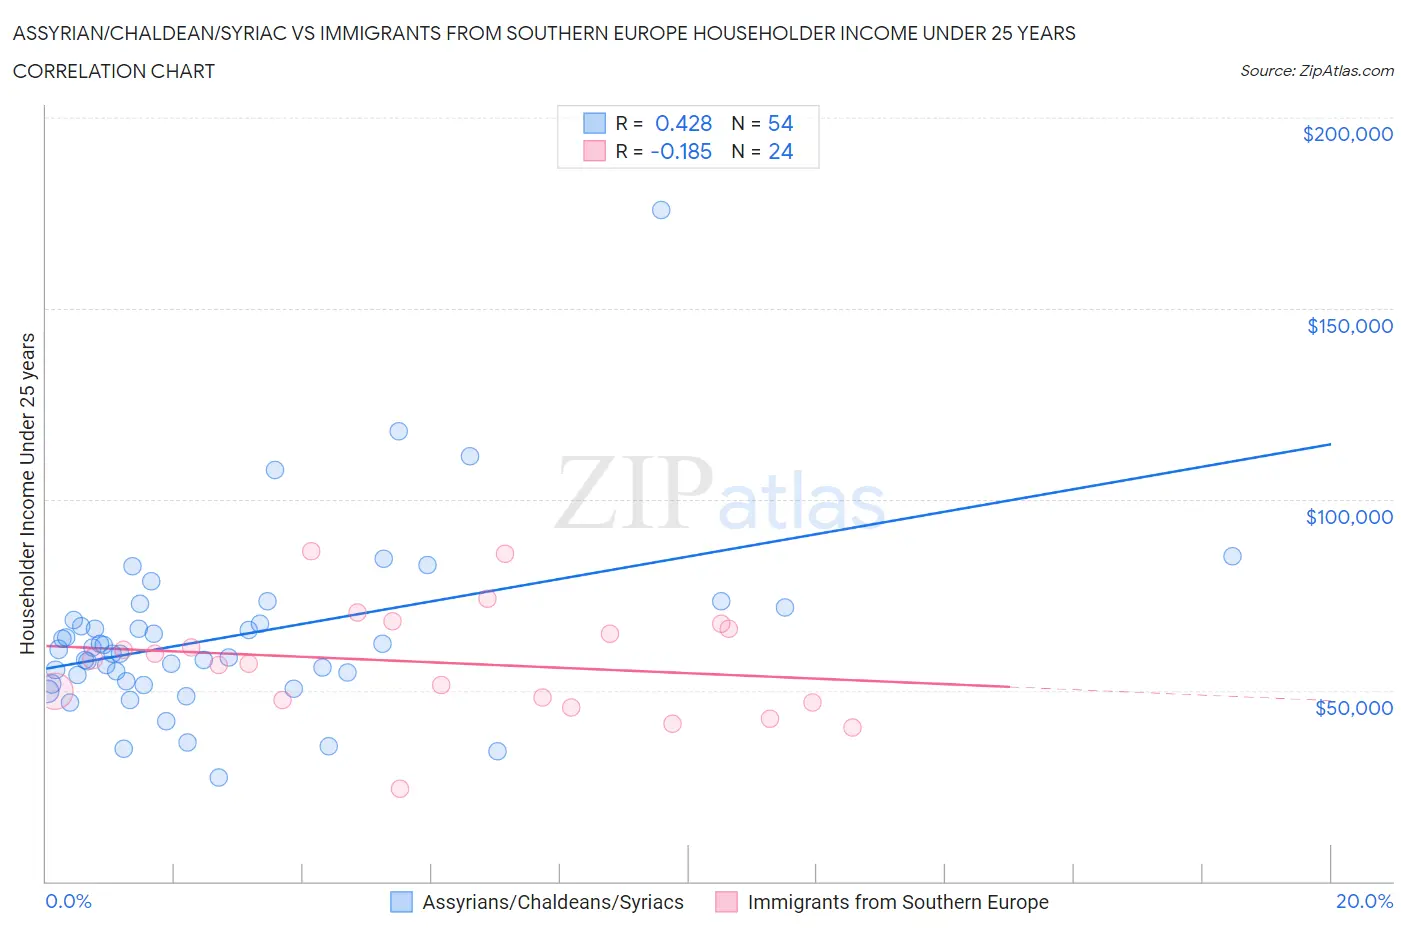 Assyrian/Chaldean/Syriac vs Immigrants from Southern Europe Householder Income Under 25 years